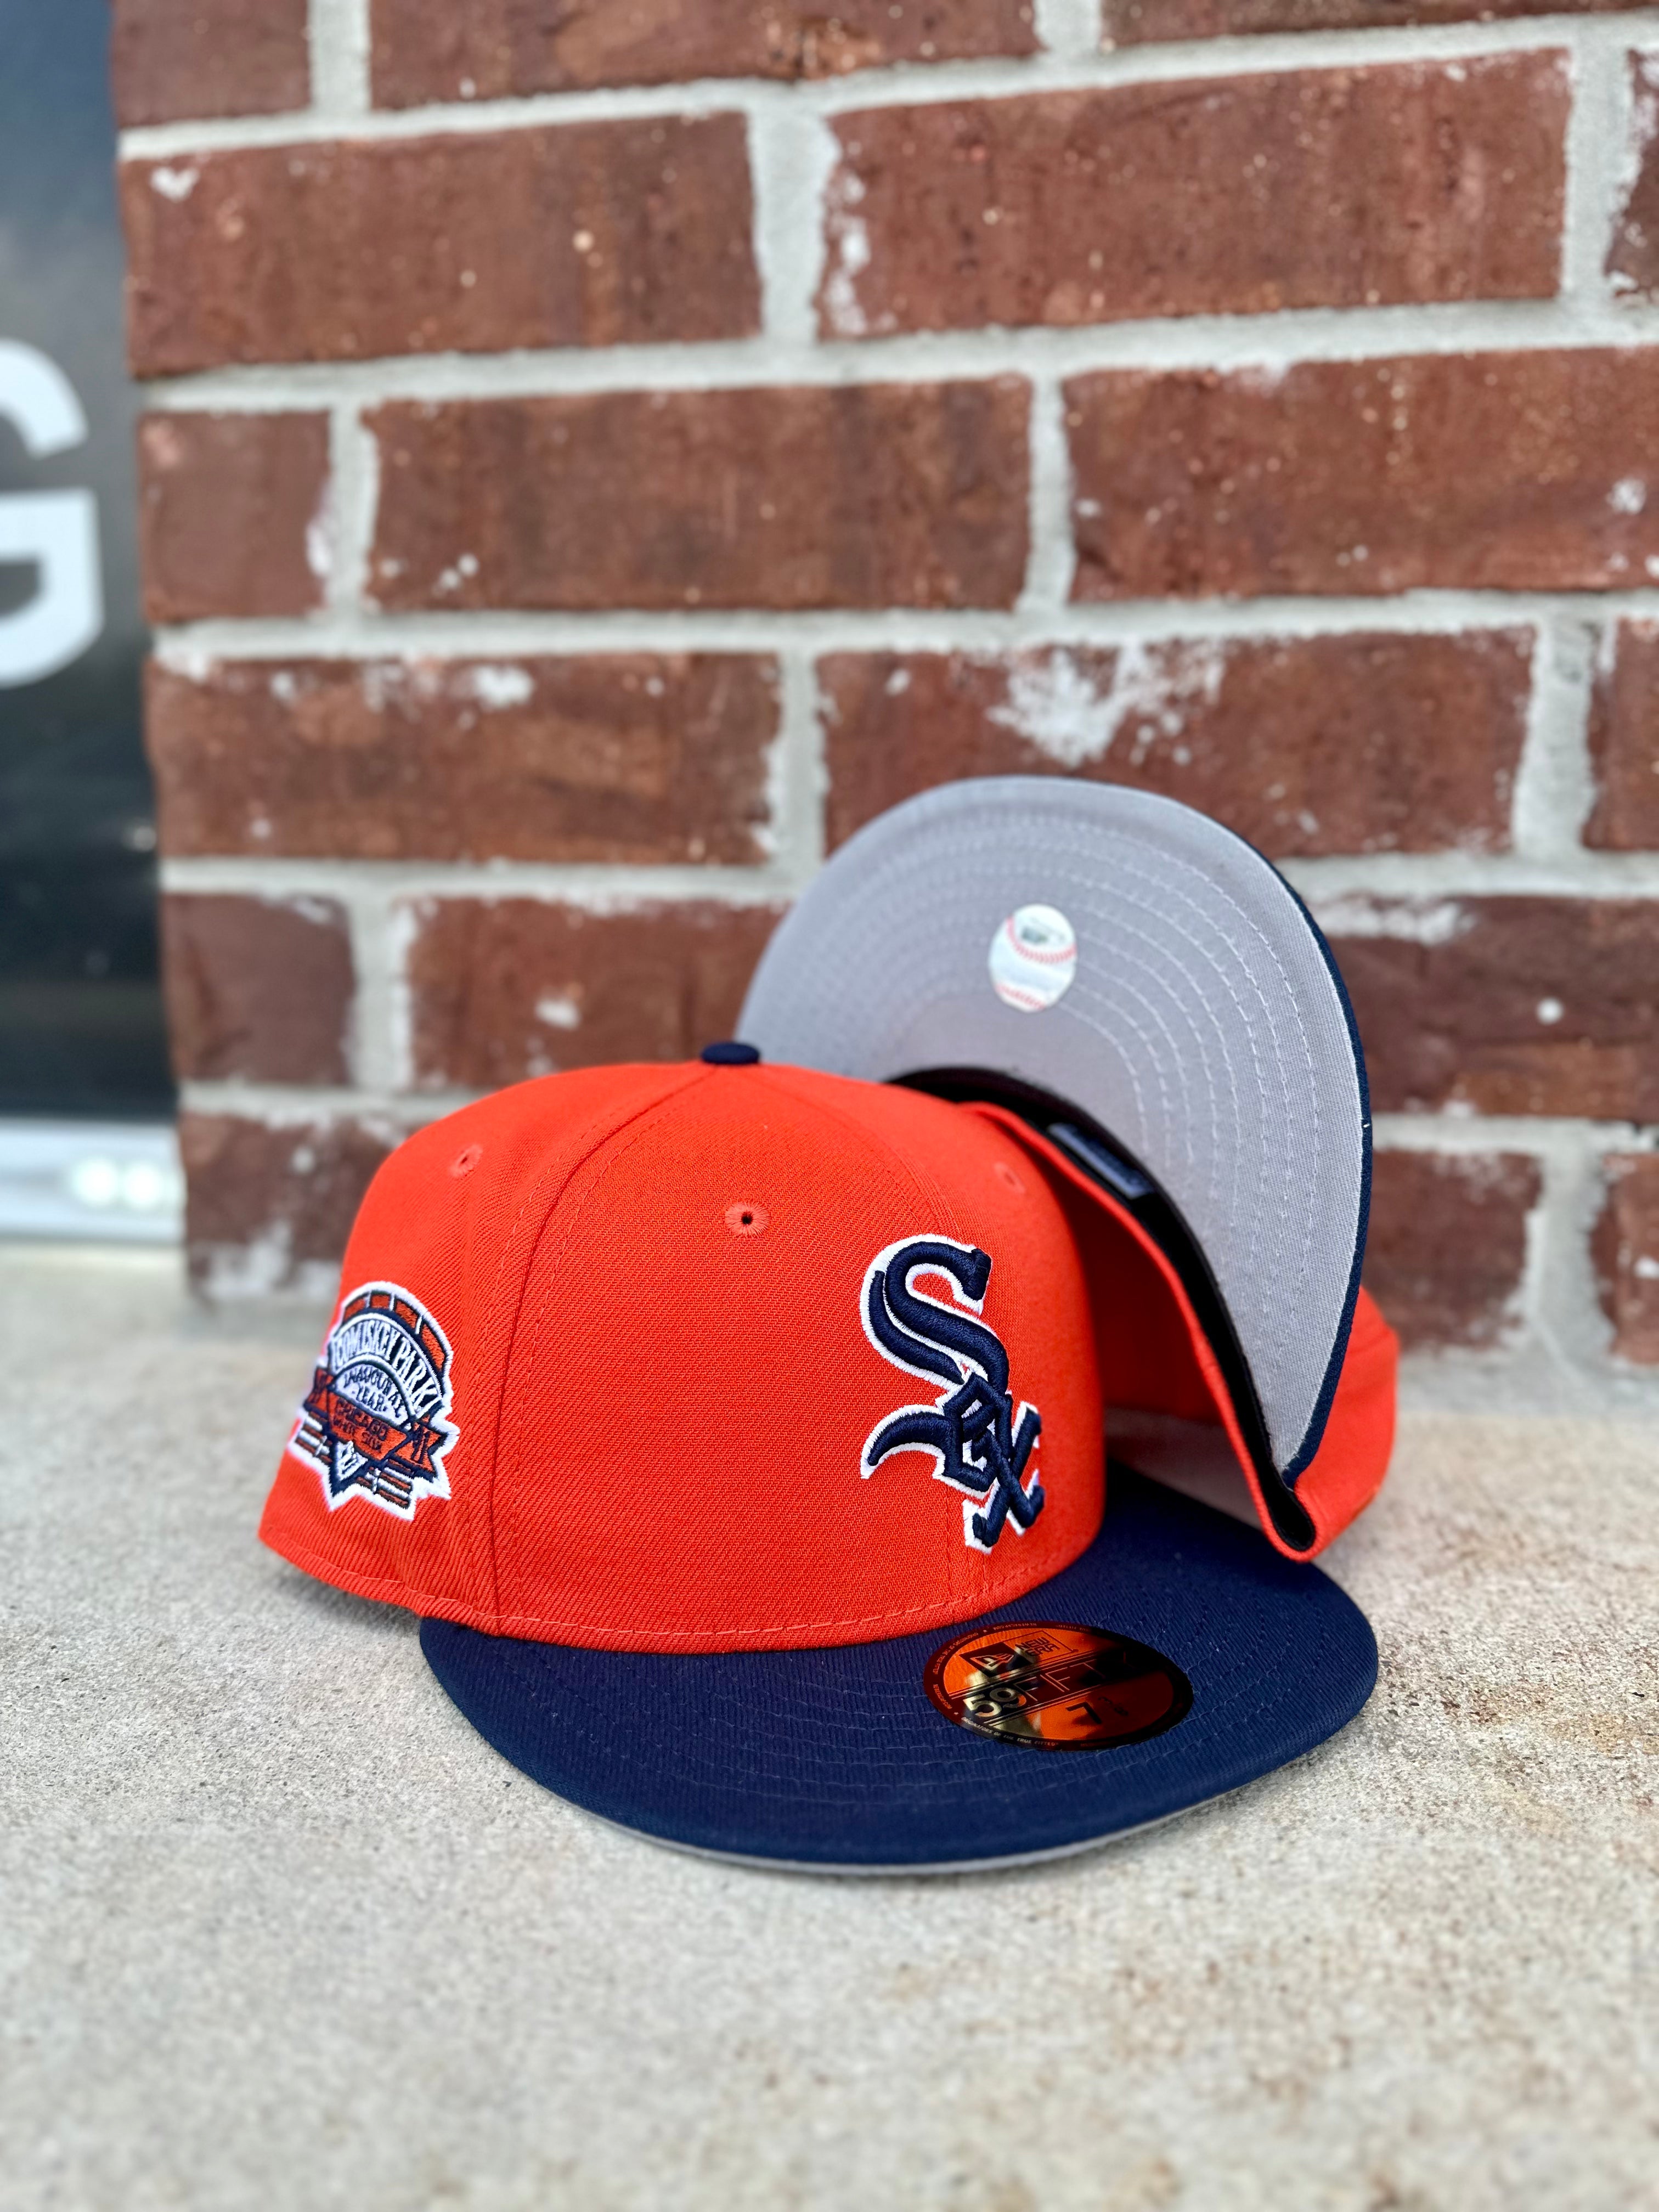 New Era 59 FIFTY Fitted "Chicago White Sox" Orange COMISKEY PARK